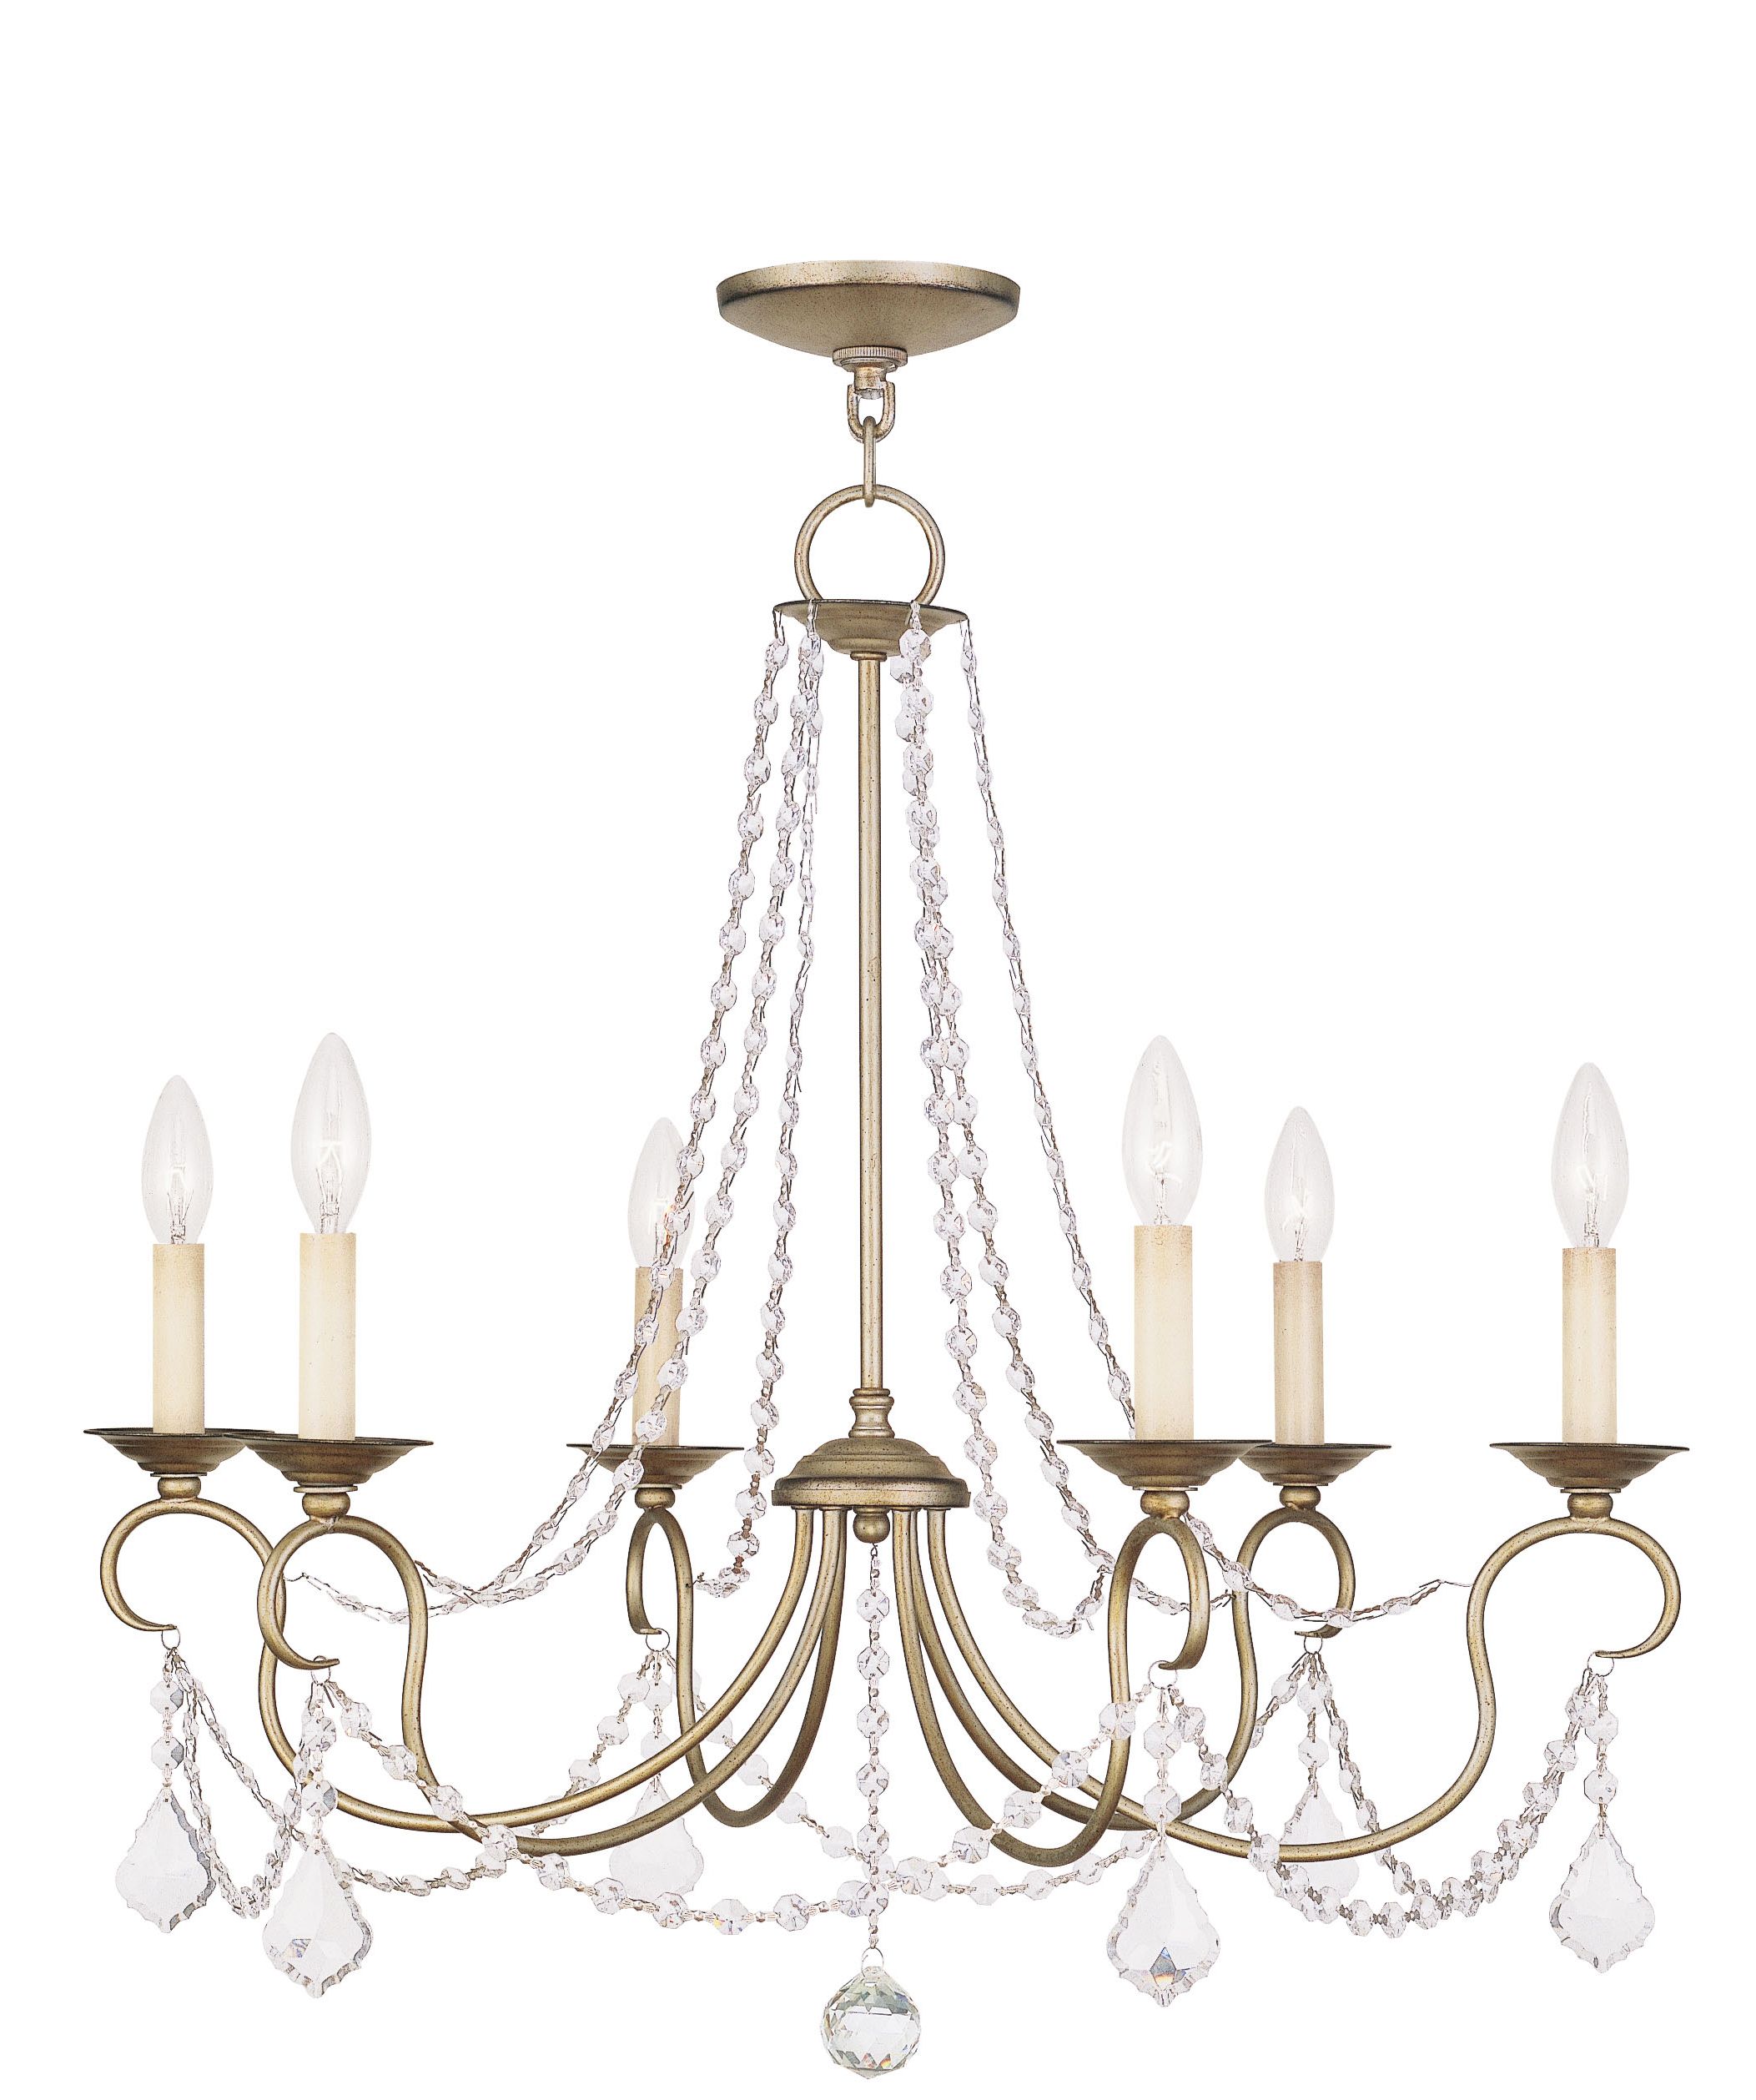 Livex Lighting Pennington Chandelier Hand Painted Antique Intended For Most Up To Date Four Light Antique Silver Chandeliers (View 8 of 15)